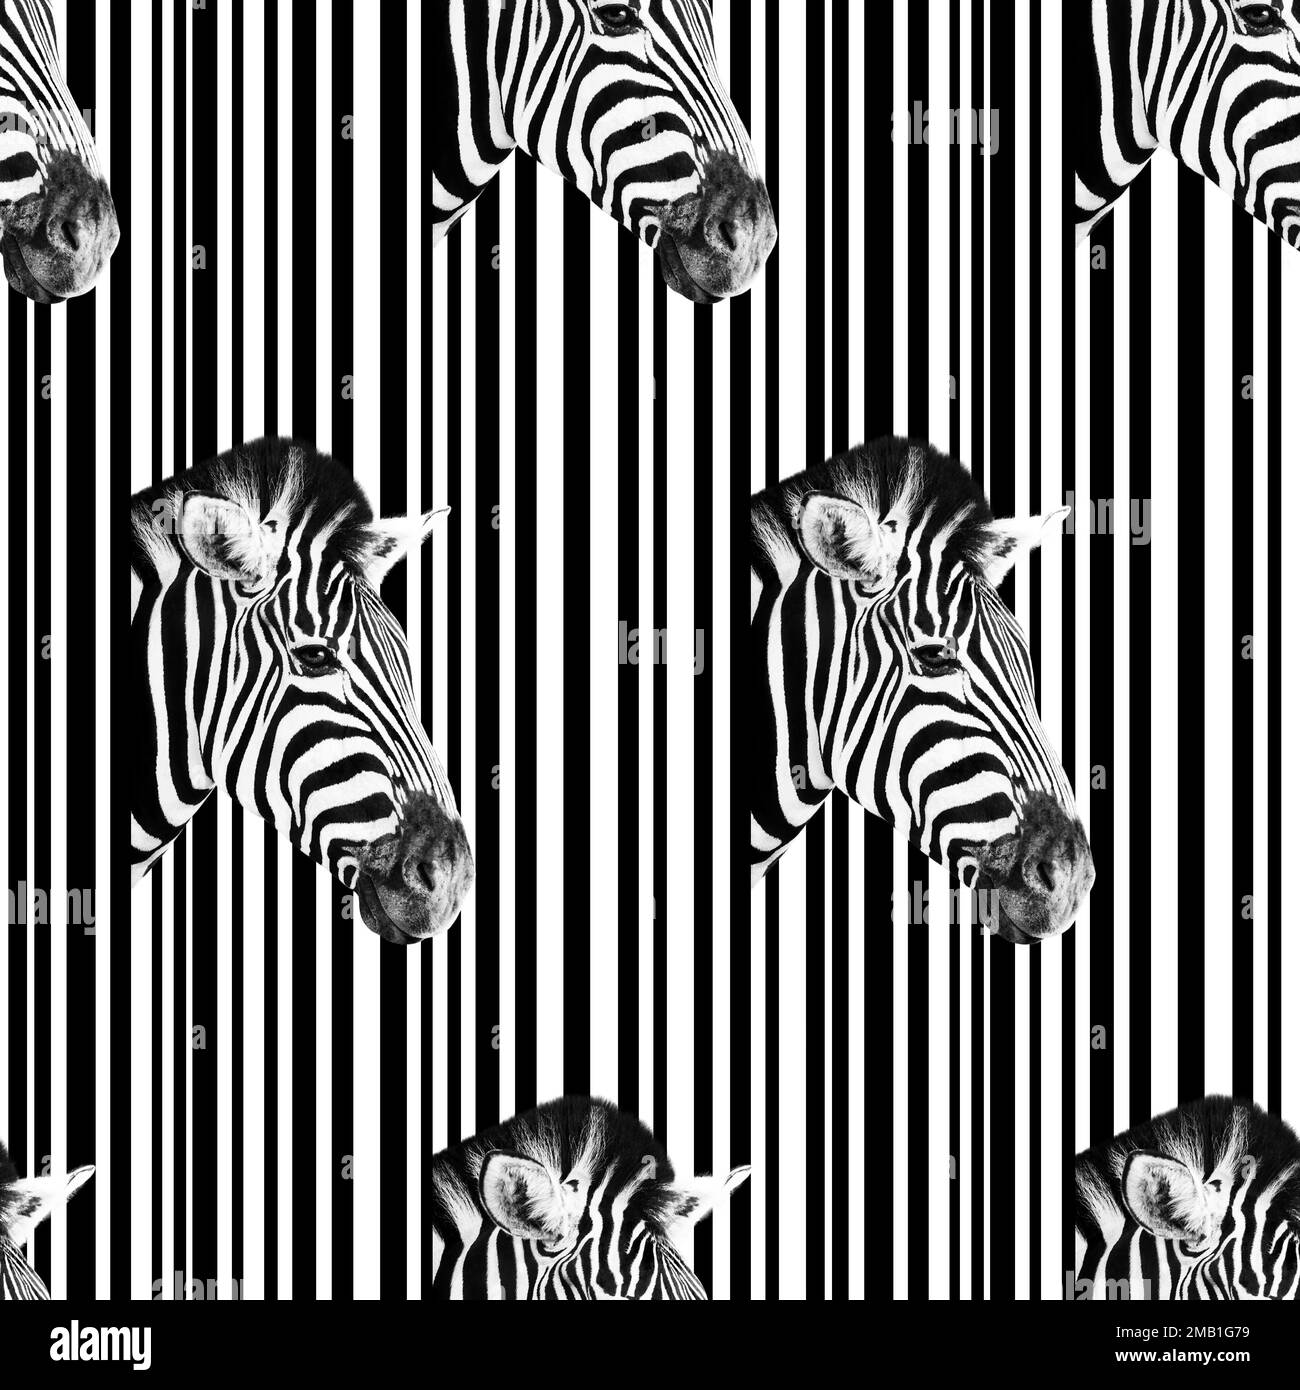 Detail of a zebra head over an abstract white and black striped background. Seamless Pattern. Stock Photo